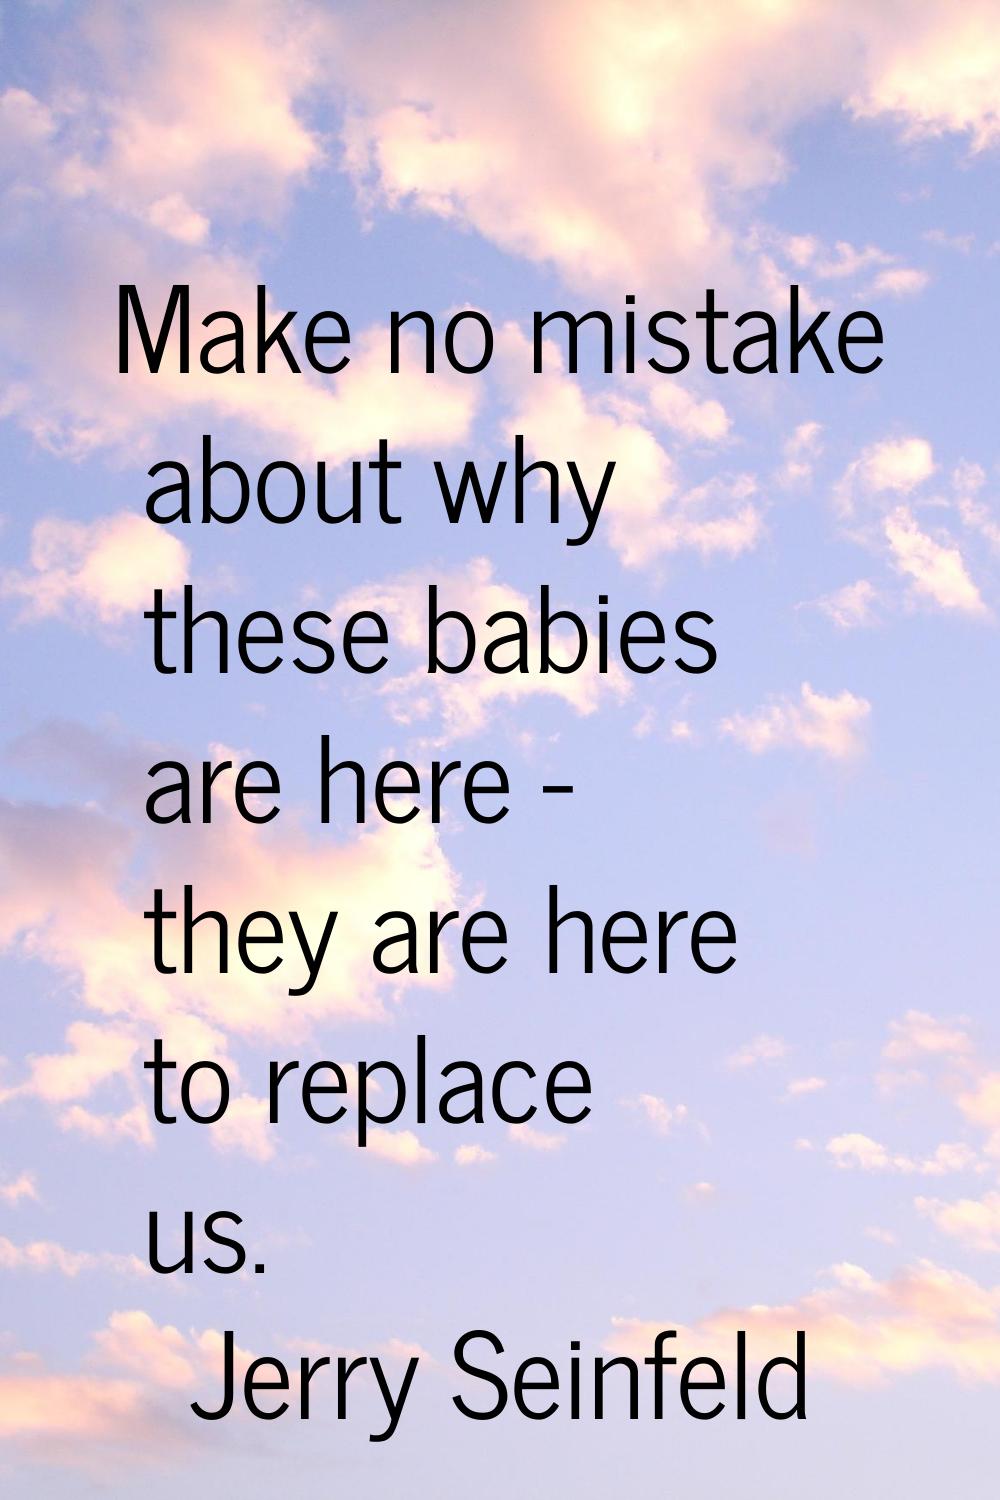 Make no mistake about why these babies are here - they are here to replace us.